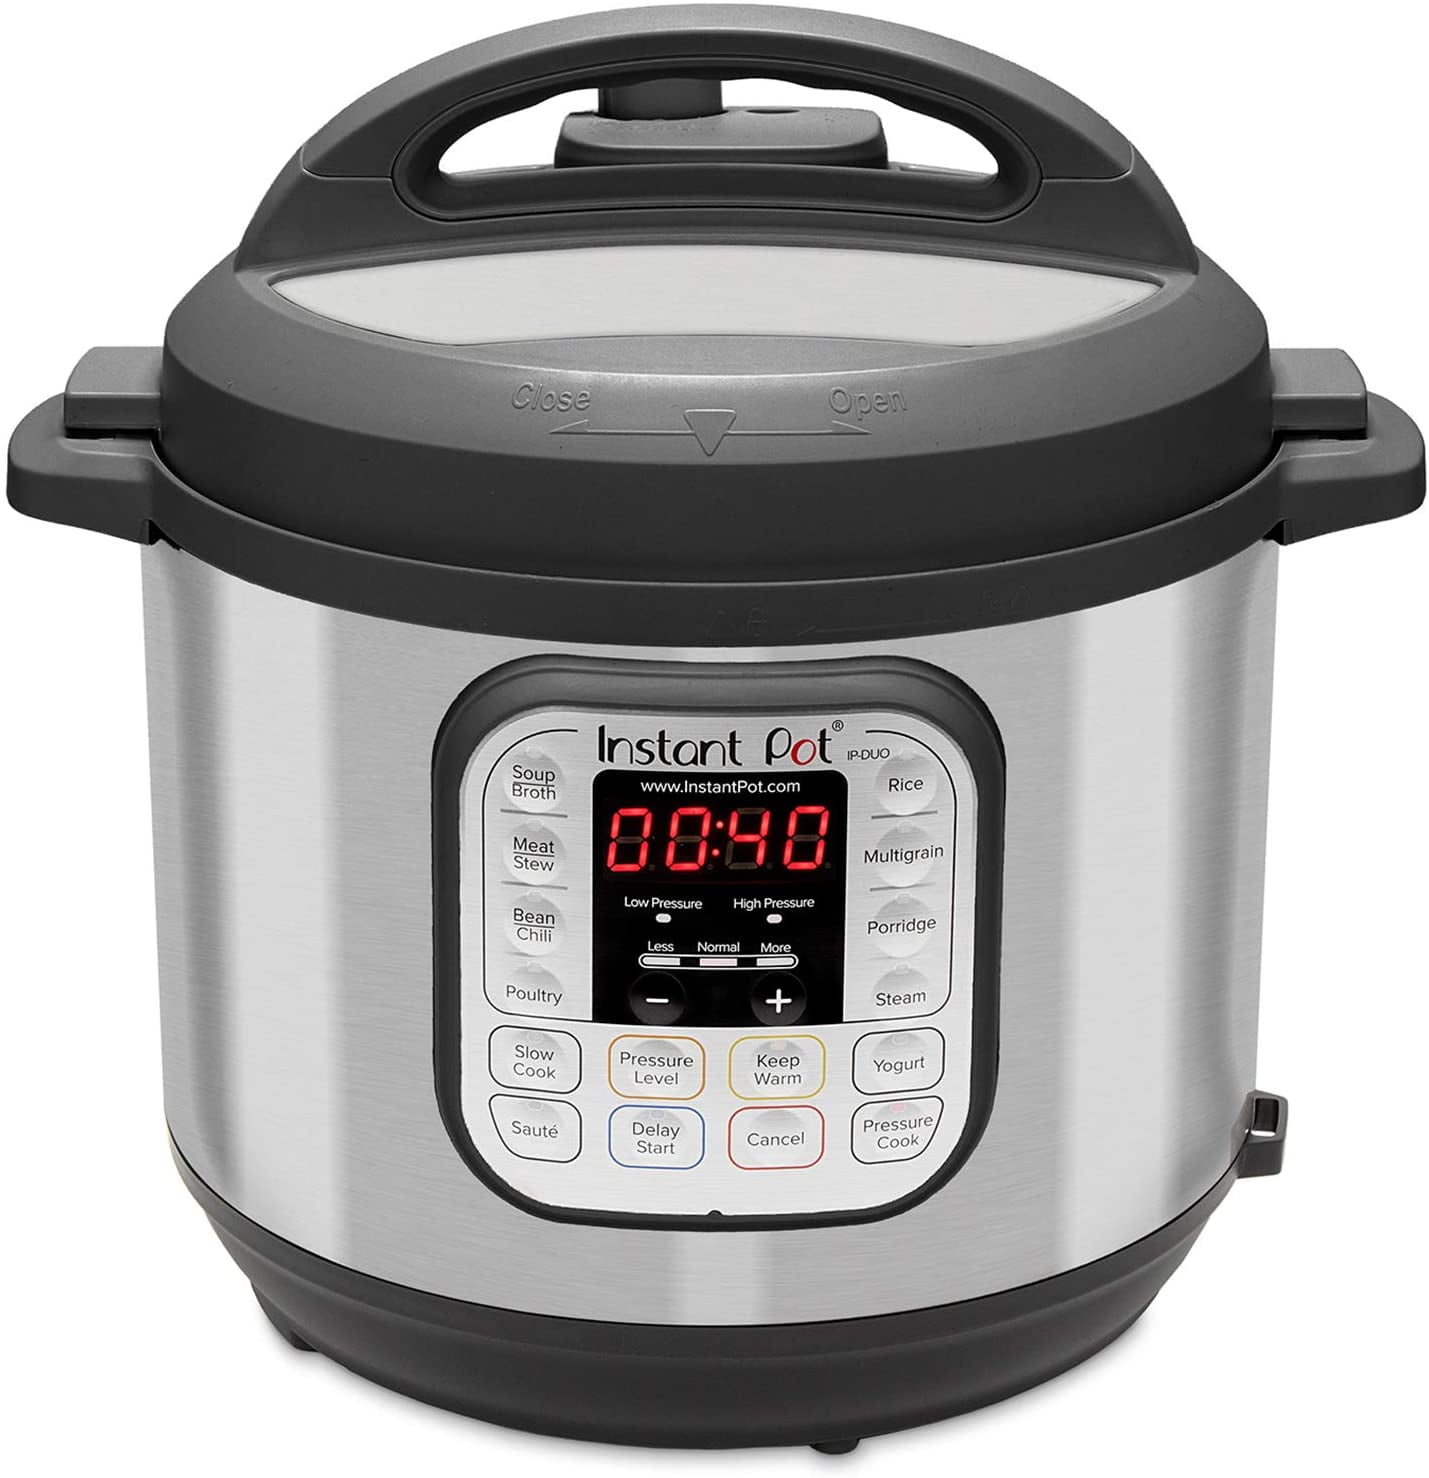 Instant Pot Duo Mini 7-in-1 Electric Pressure Cooker and Mitts ‚Äì Make  Yogurt, Rice, Slow Cook, Saut√©, Steam and More